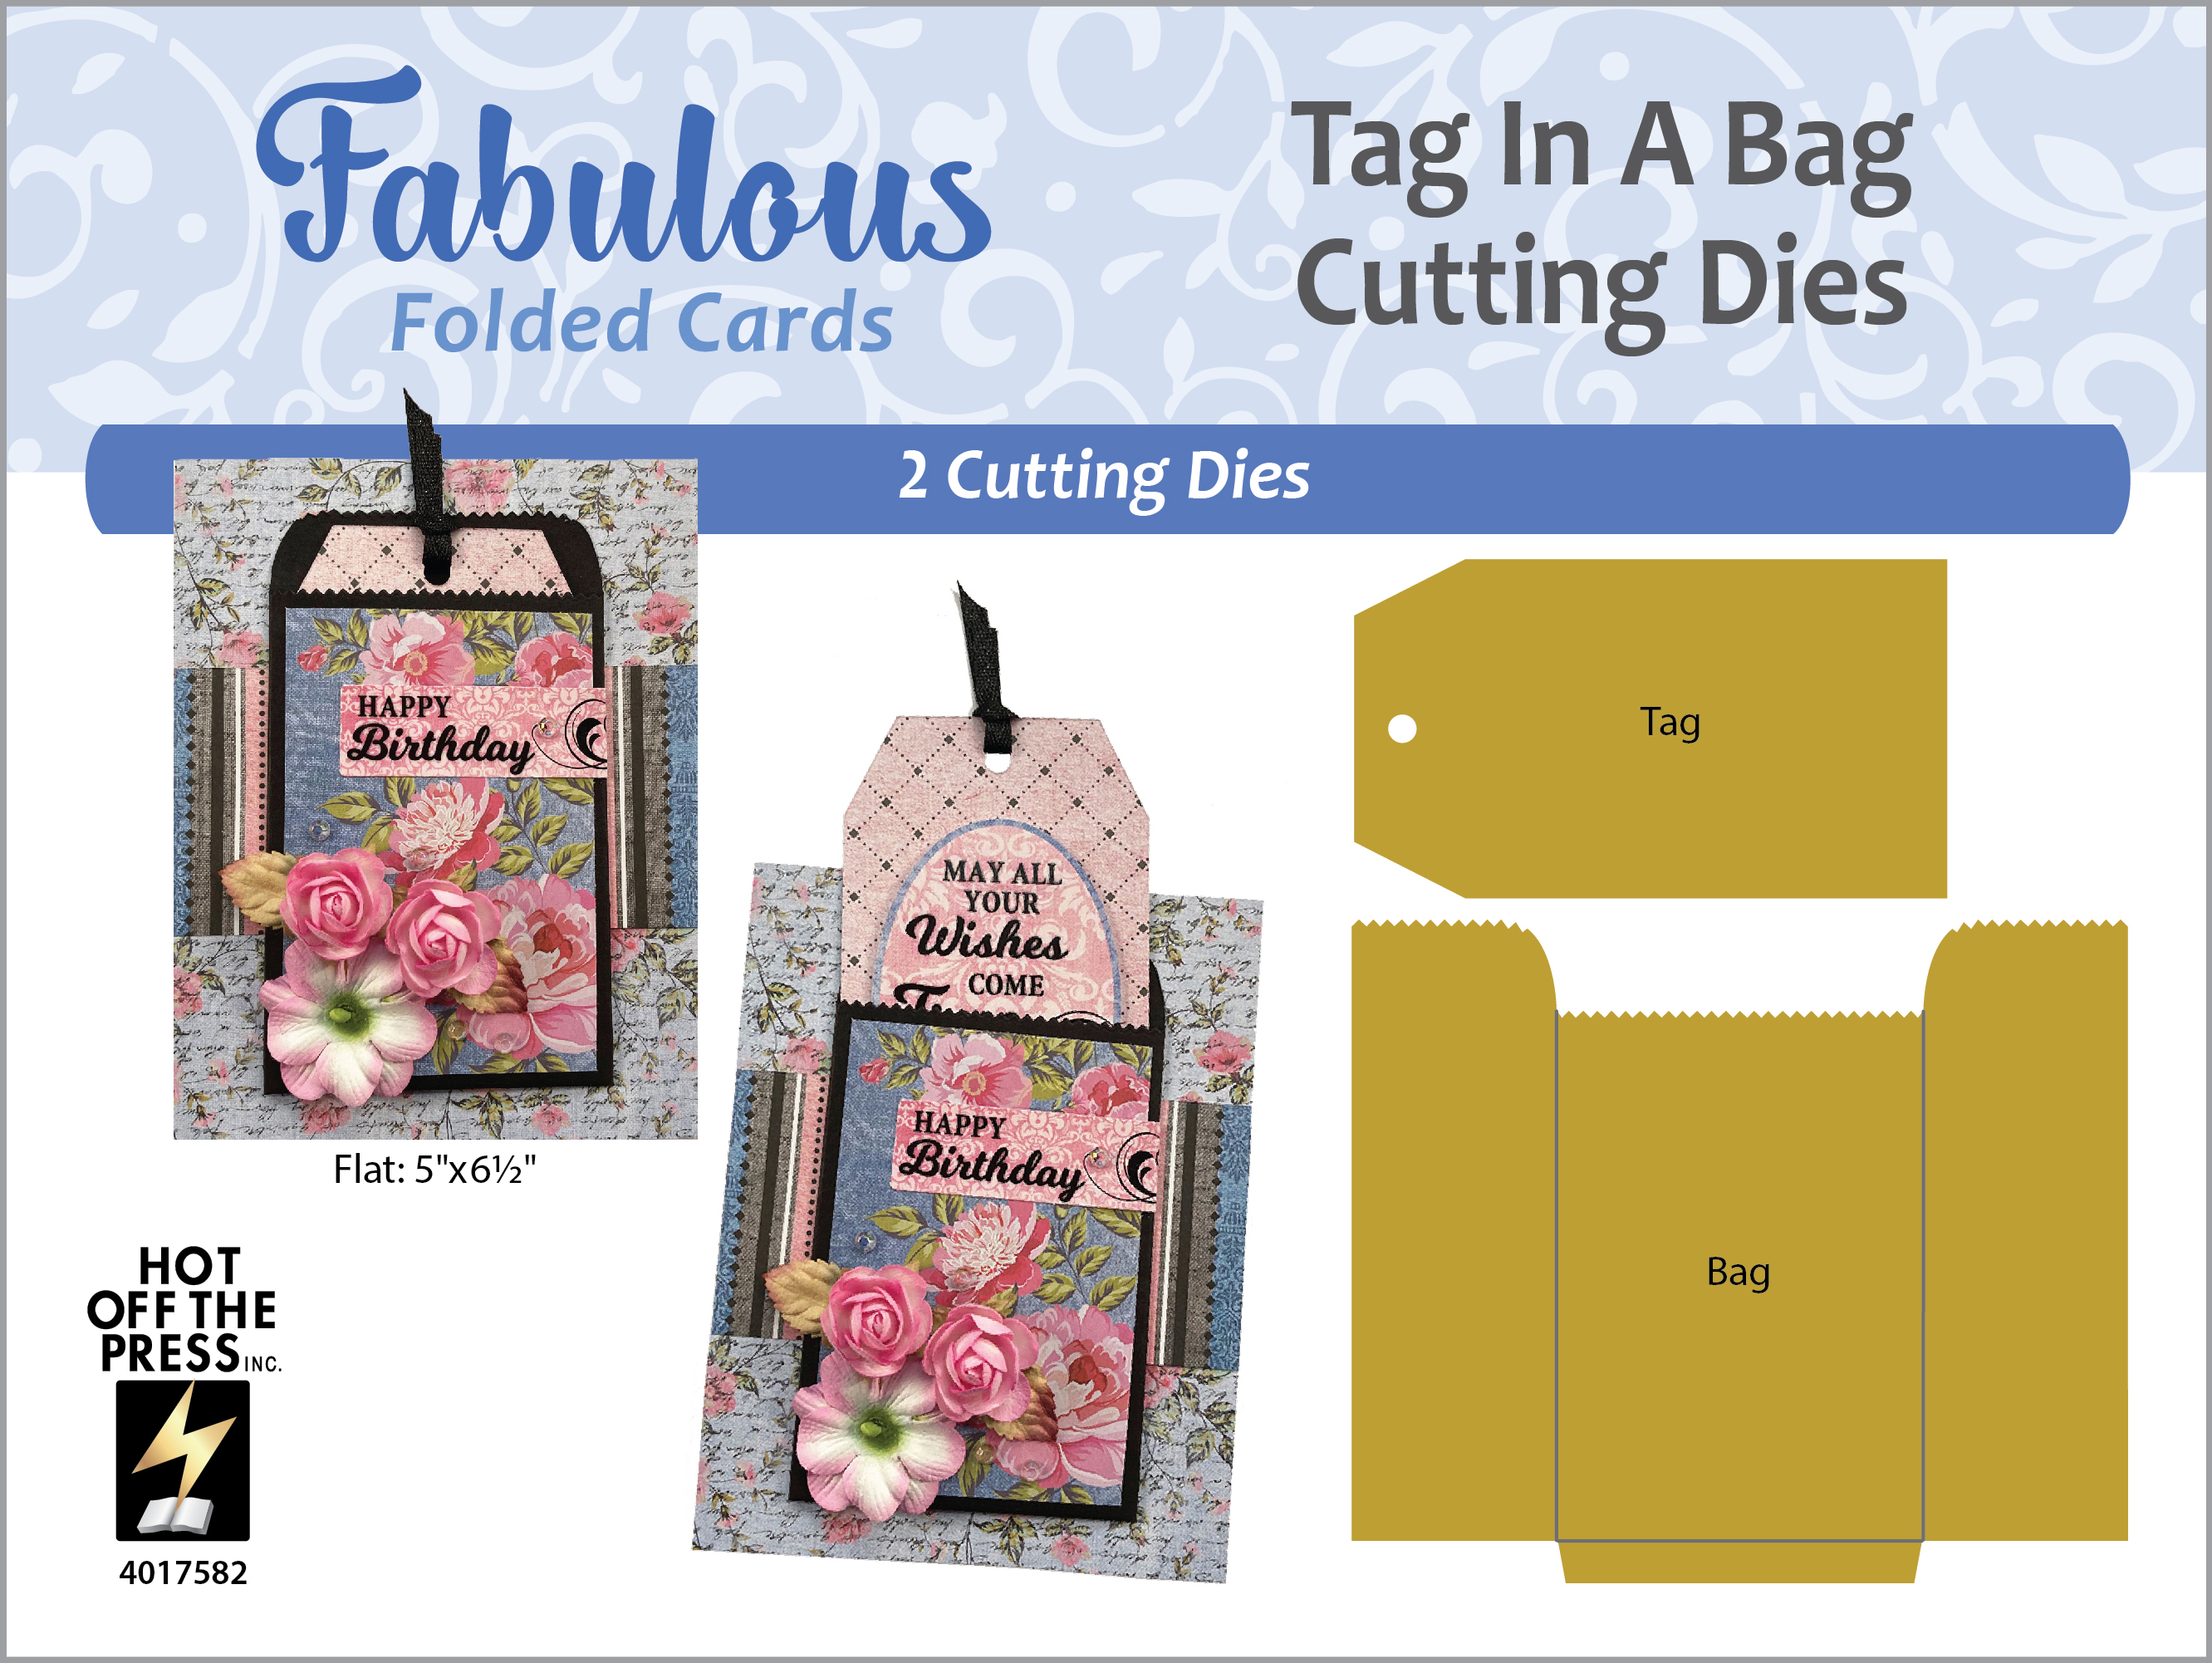 Tag in a Bag Cutting Dies Fabulous Folded